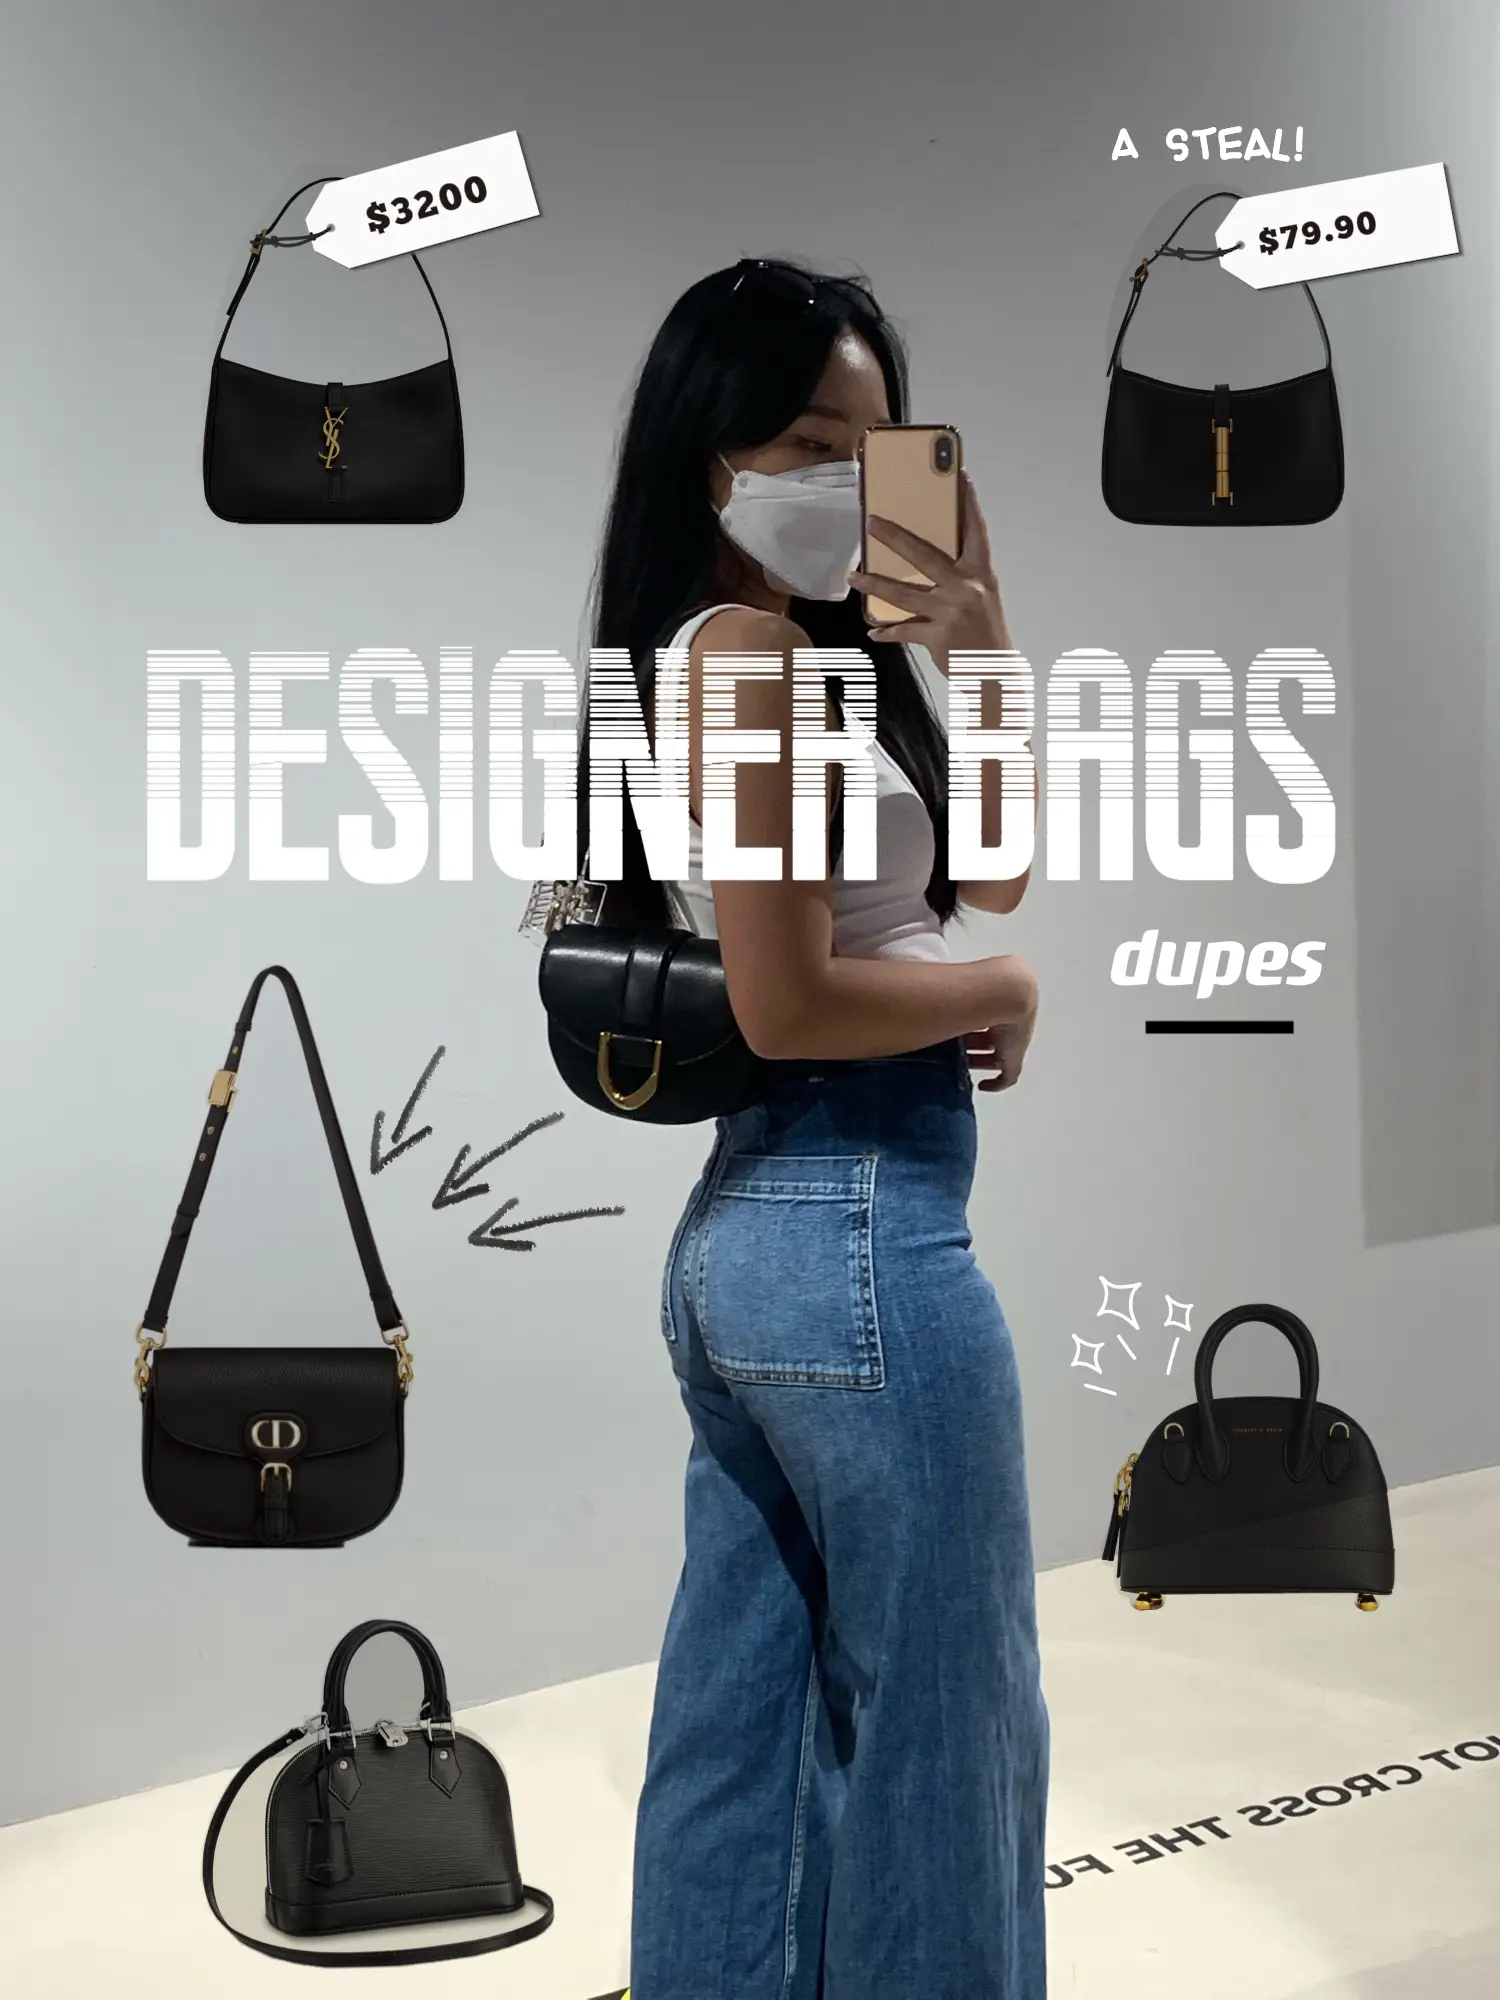 Designer dupe bags for less than $100!!!, Gallery posted by Felicia✨